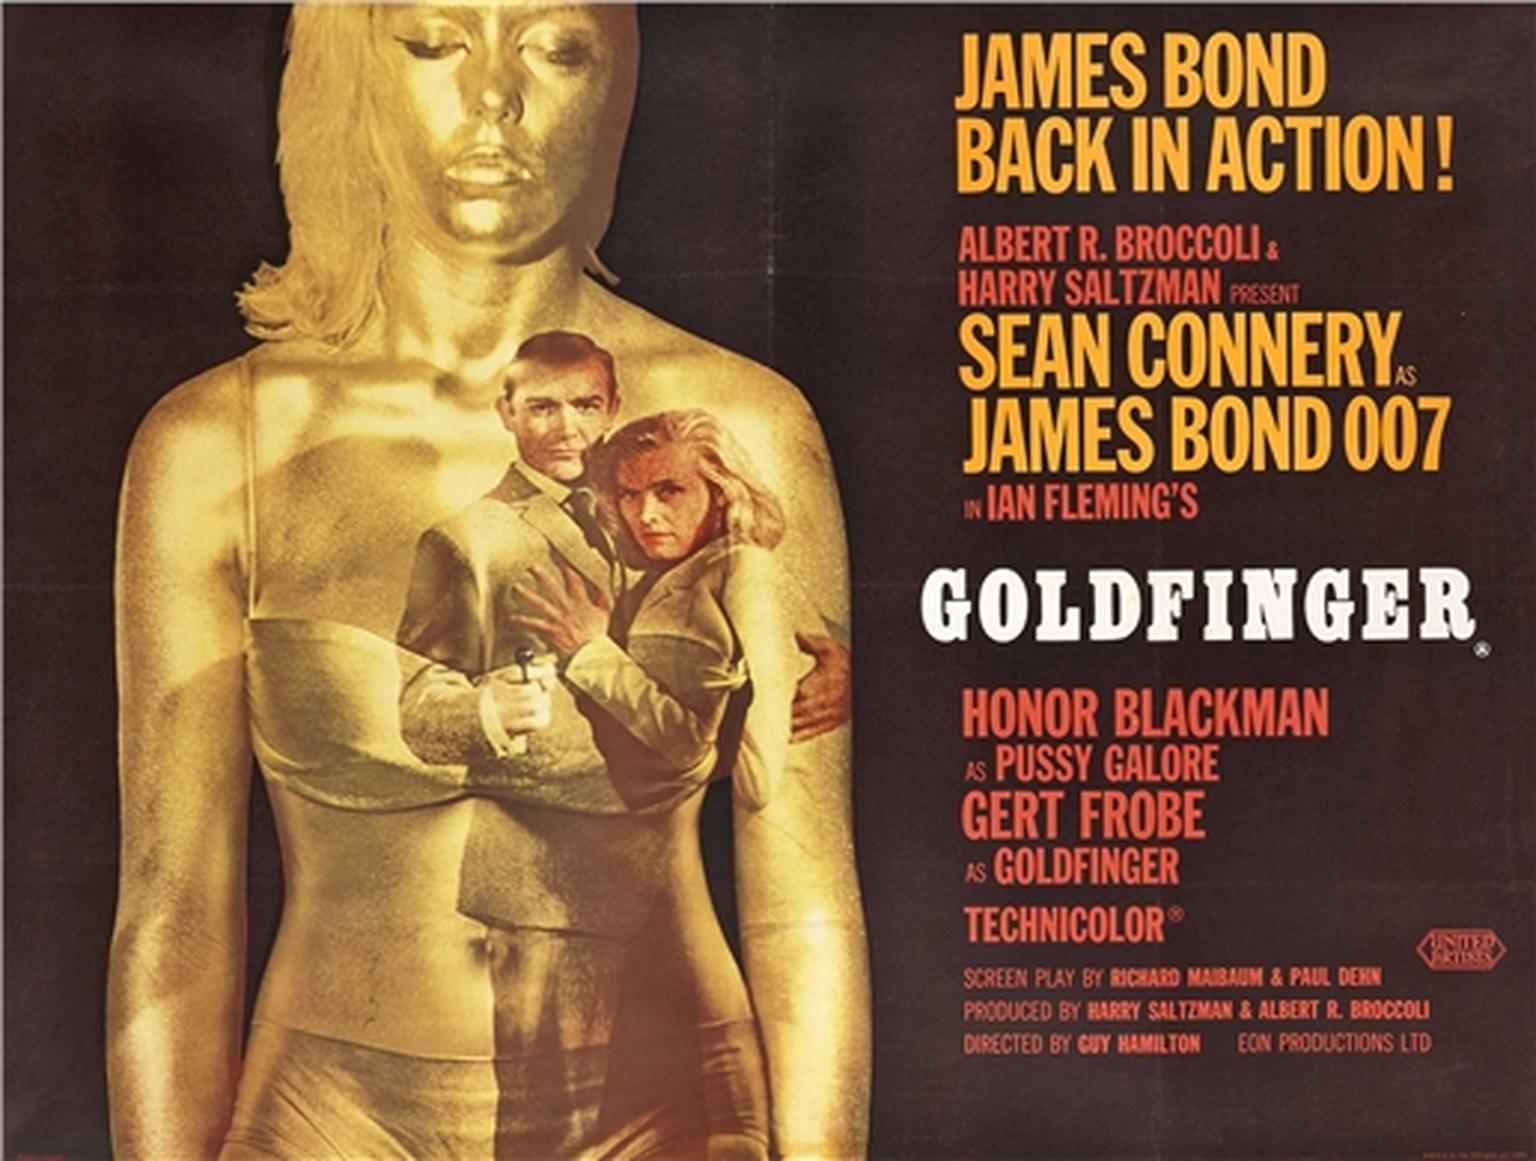 An original ad for Ian Fleming's Goldfinger, starring Sean Connery as James Bond and Honor Blackman as Pussy Galore.